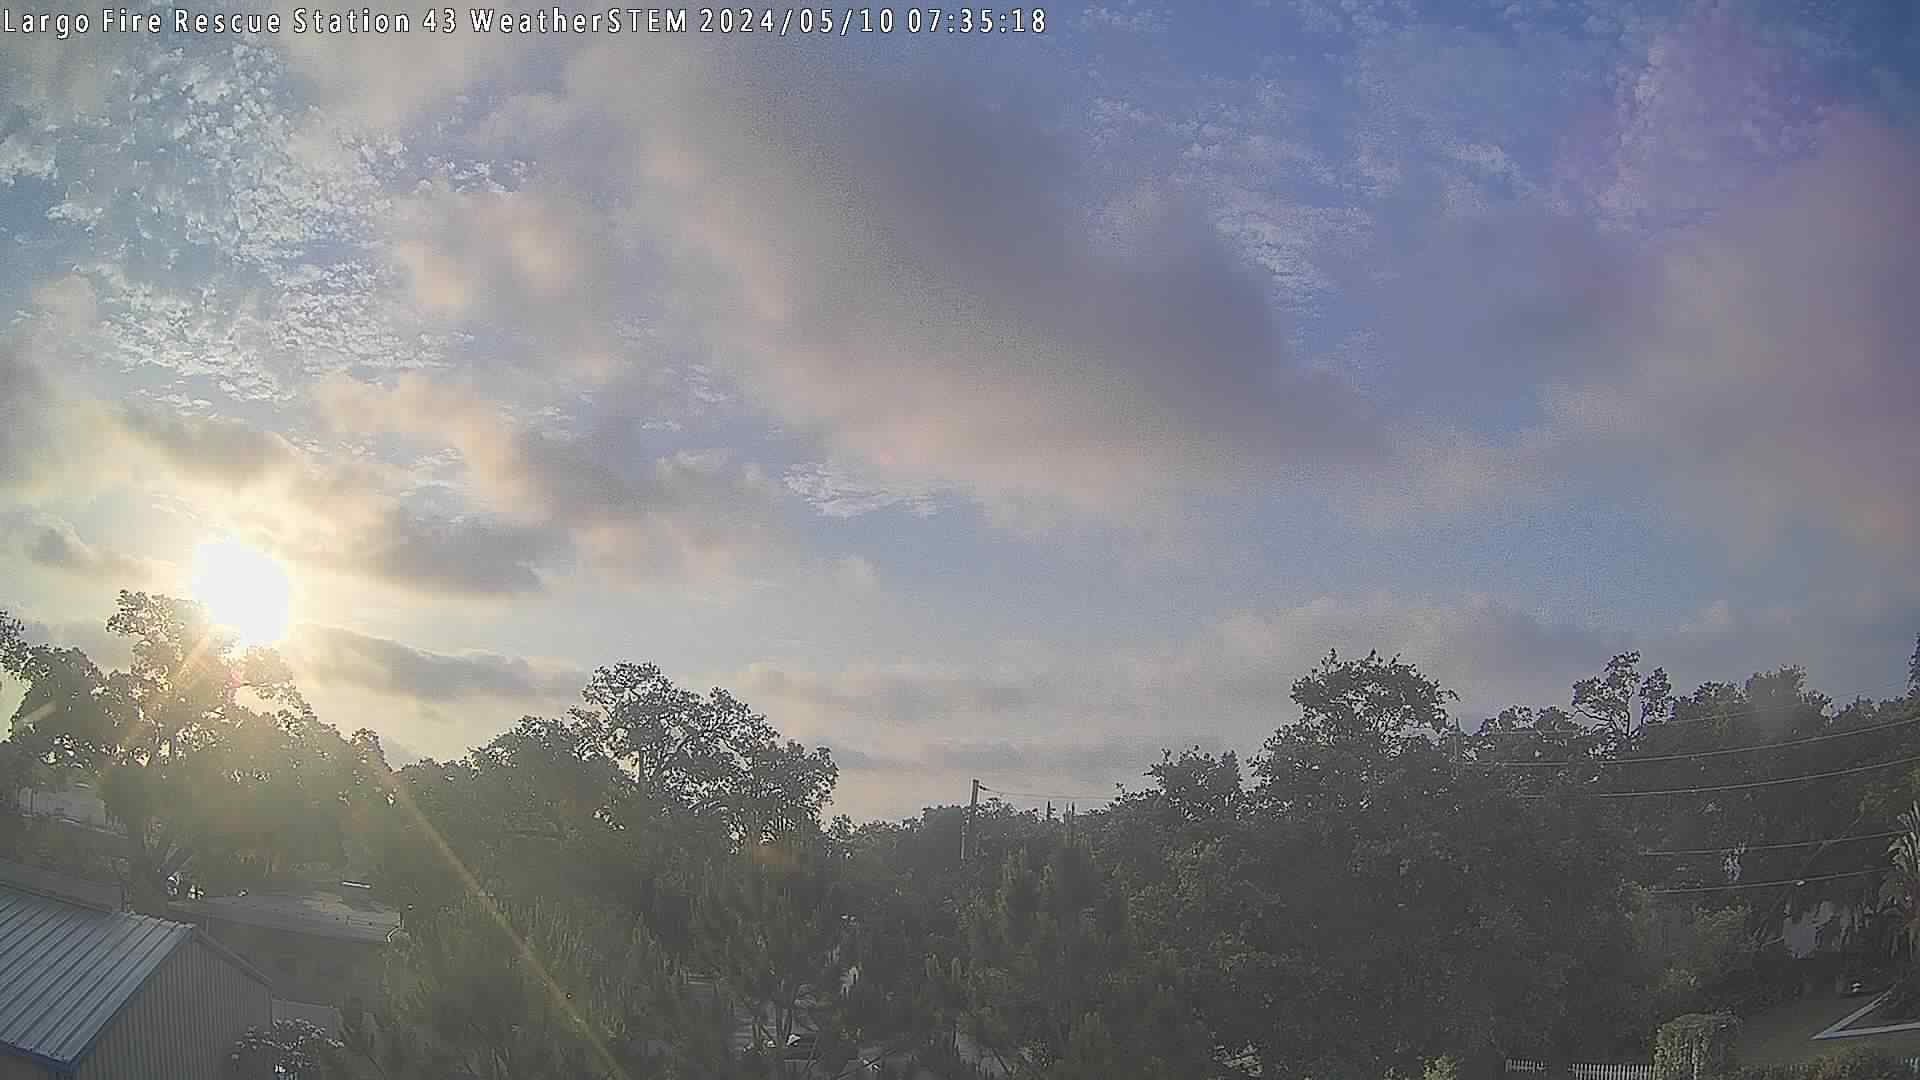  WeatherSTEM Cloud Camera null in Pinellas County, Florida FL at Largo Fire Rescue Station 43